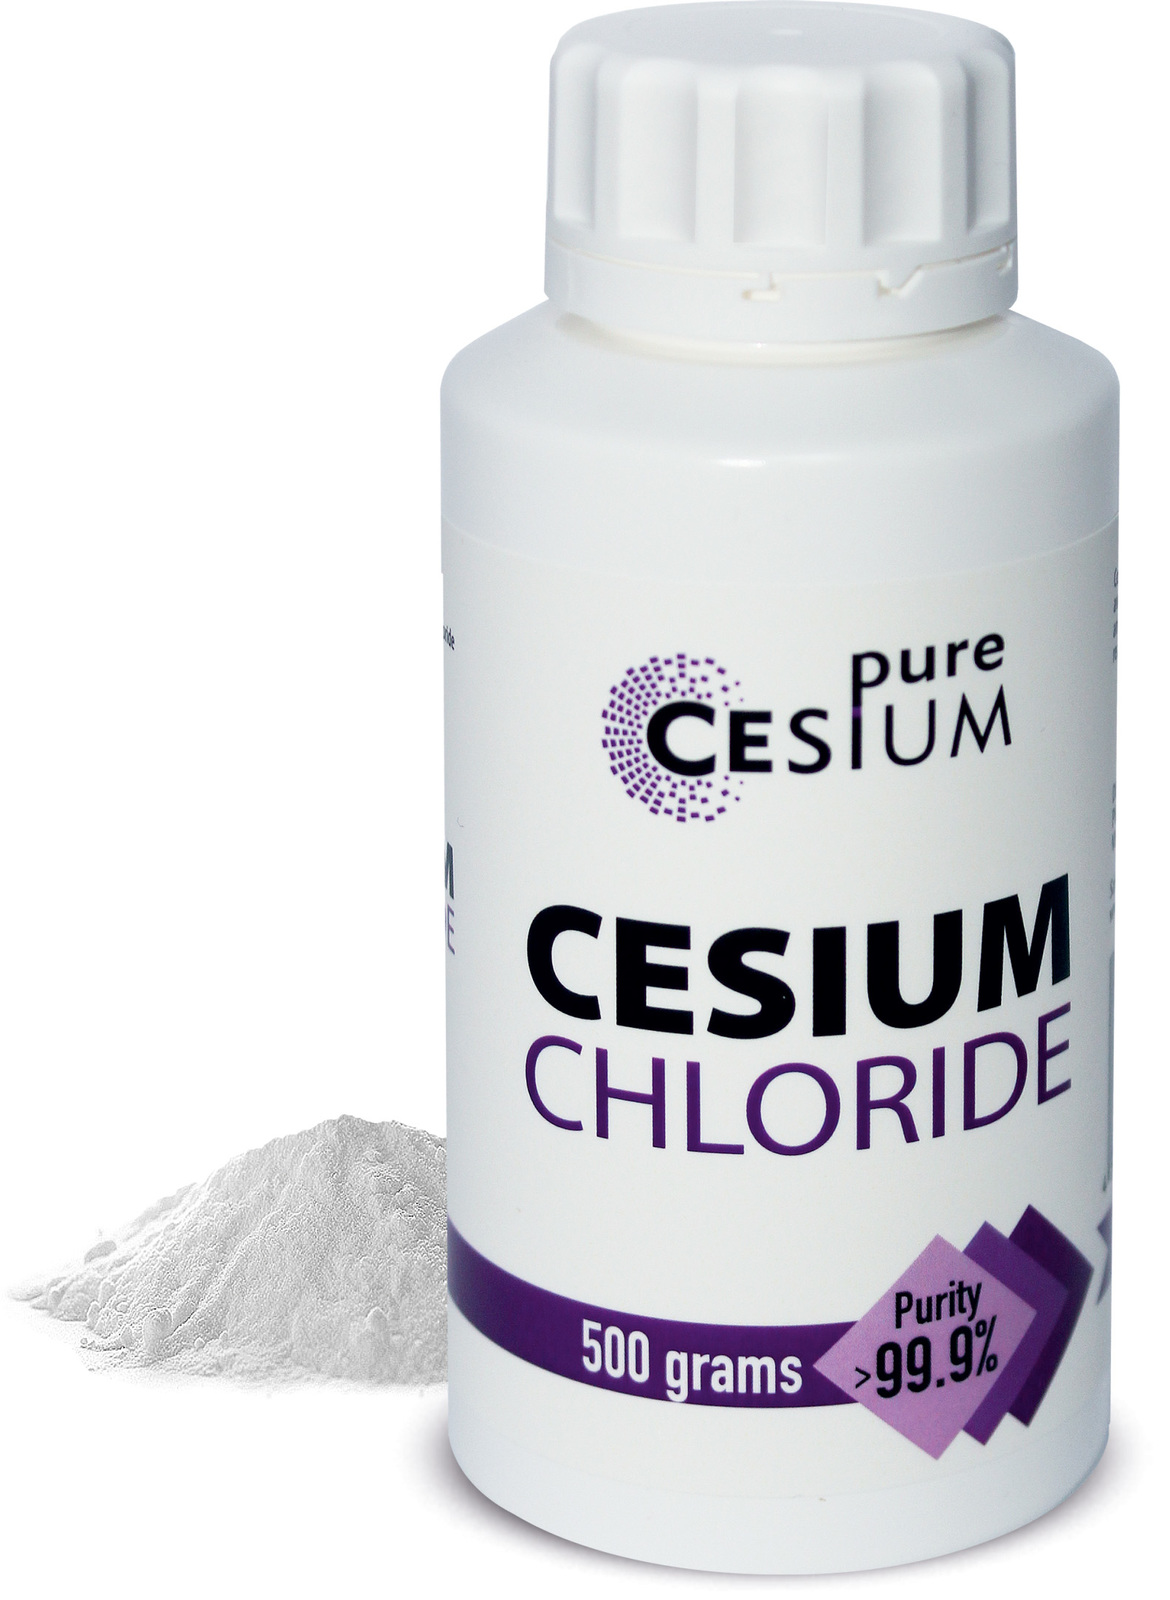 Pure Cesium Chloride CsCl 500g Powder, Purity >99.9% CoA Incl, CL Tested, 17.6oz - $349.99